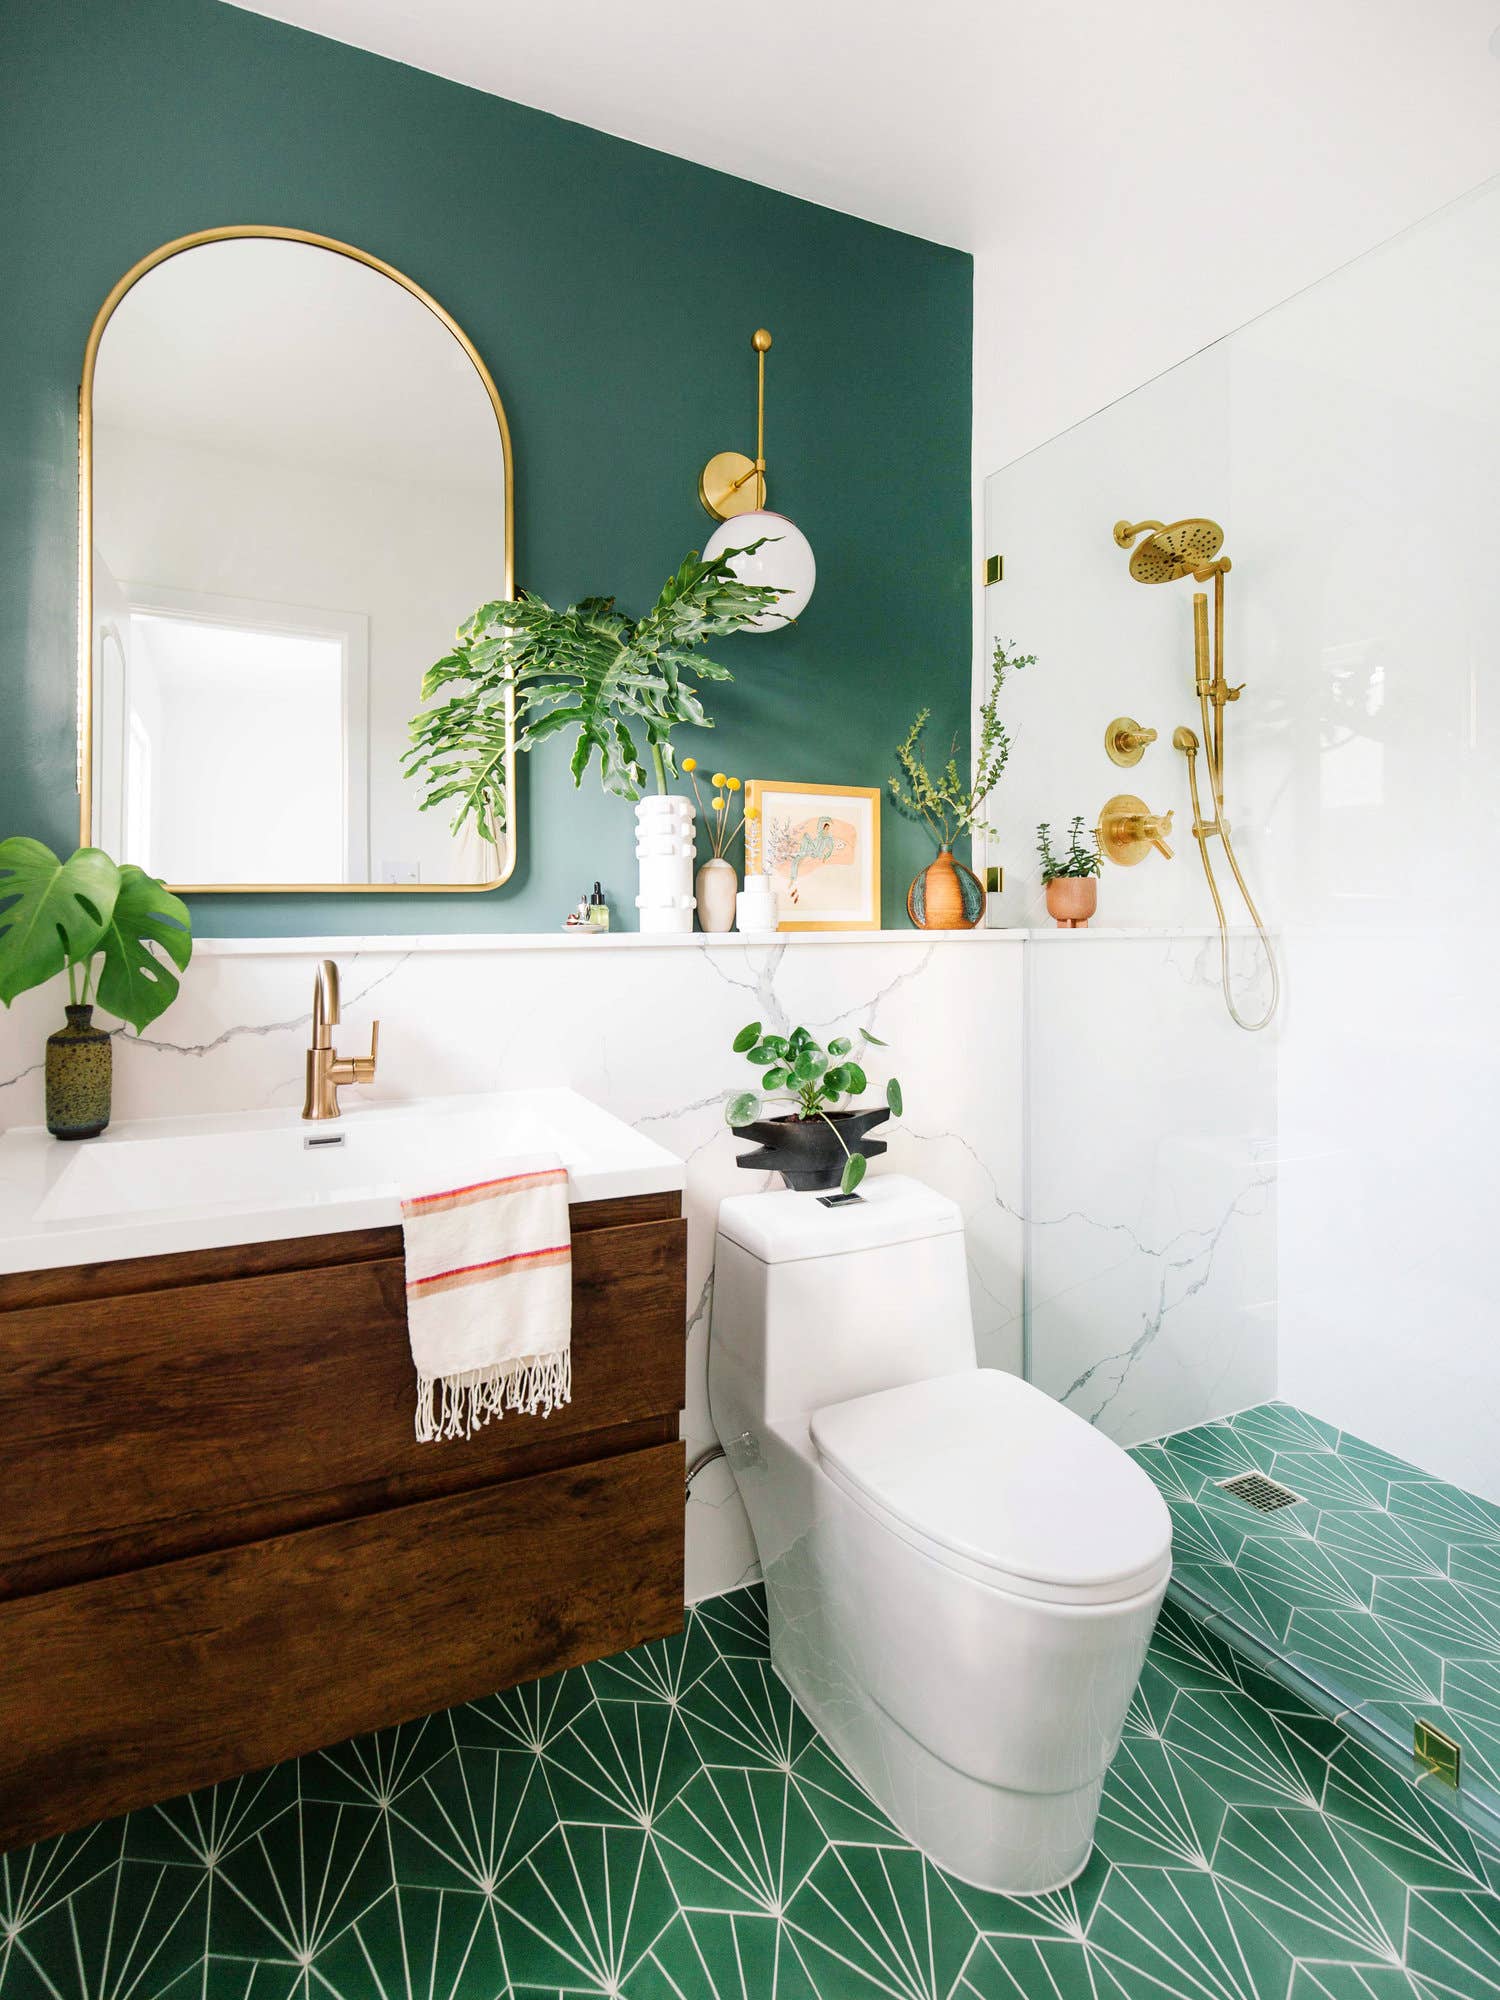 8 Bathroom Paint Colors That Will Inspire a Run to the Hardware Store